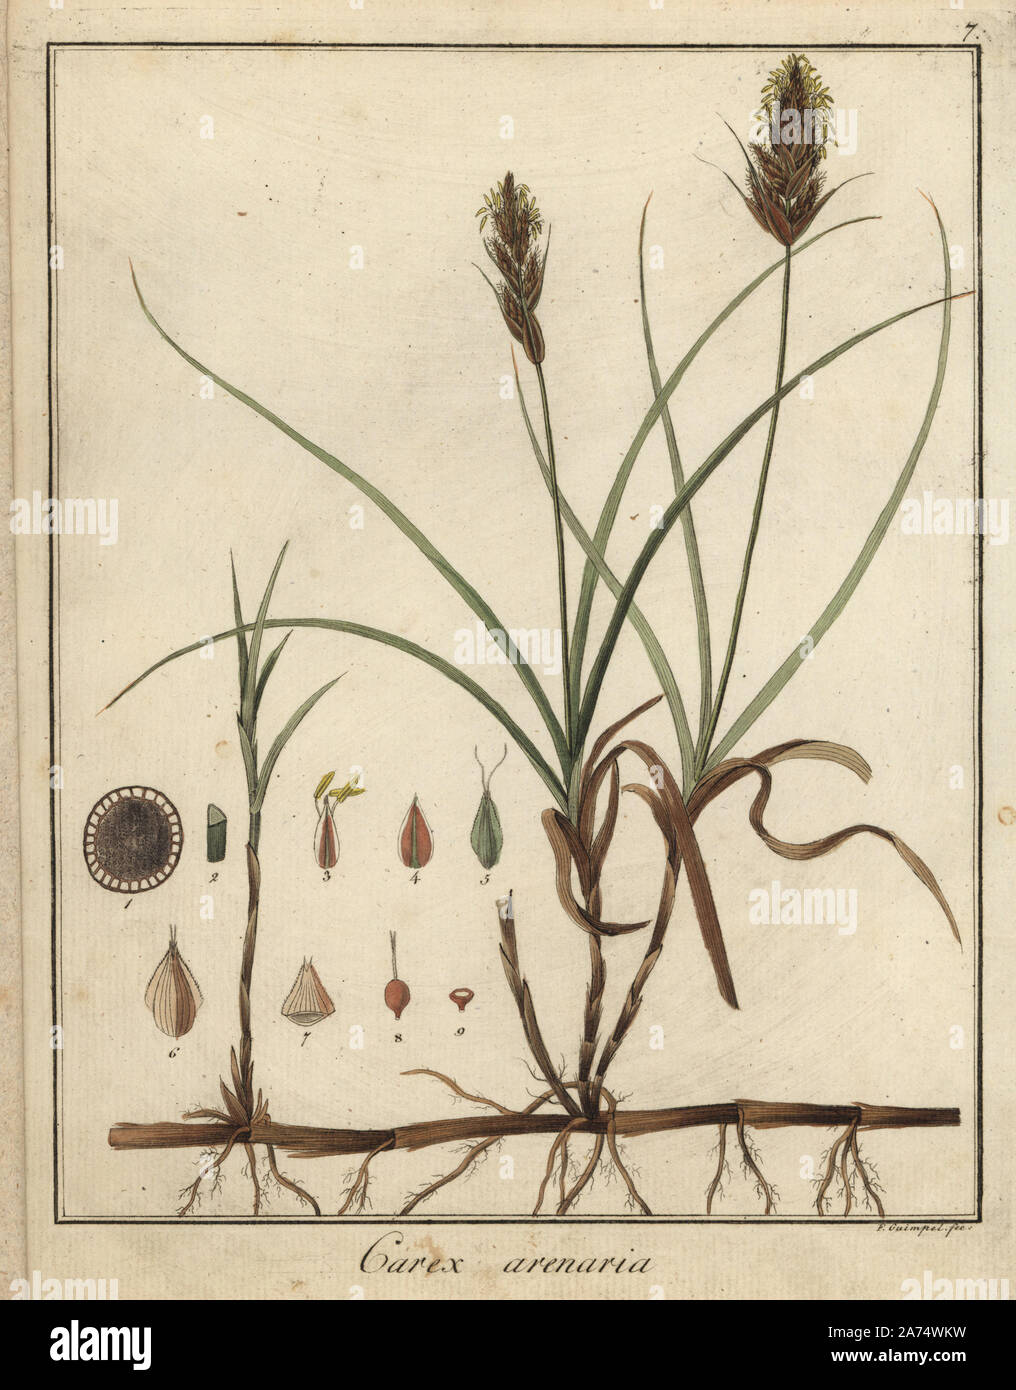 Sand sedge, Carex arenaria. Handcoloured copperplate engraving by F. Guimpel from Dr. Friedrich Gottlob Hayne's Medical Botany, Berlin, 1822. Hayne (1763-1832) was a German botanist, apothecary and professor of pharmaceutical botany at Berlin University. Stock Photo